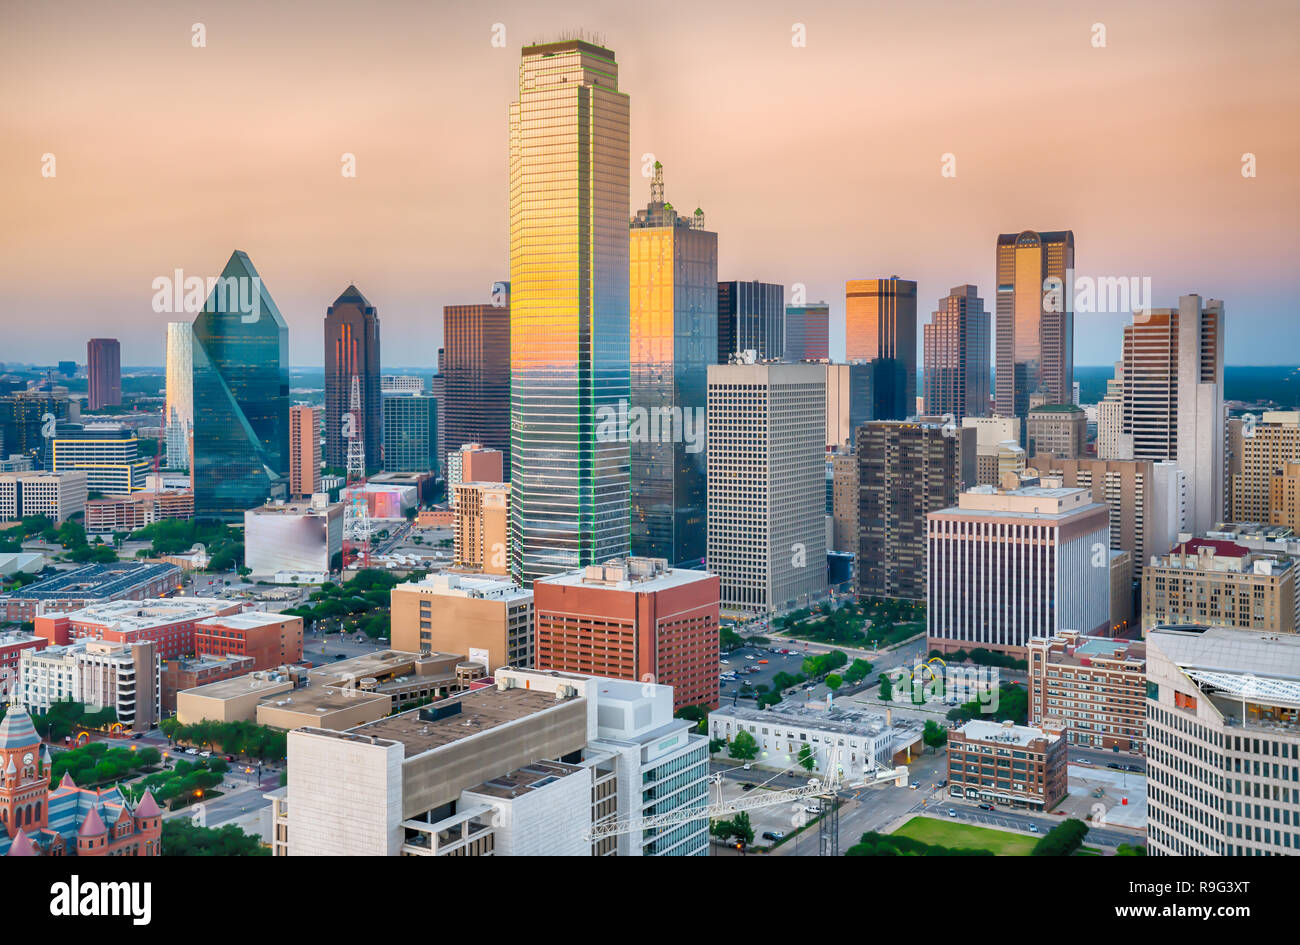 Aerial view of Dallas, Texas city skyline at sunset Stock Photo